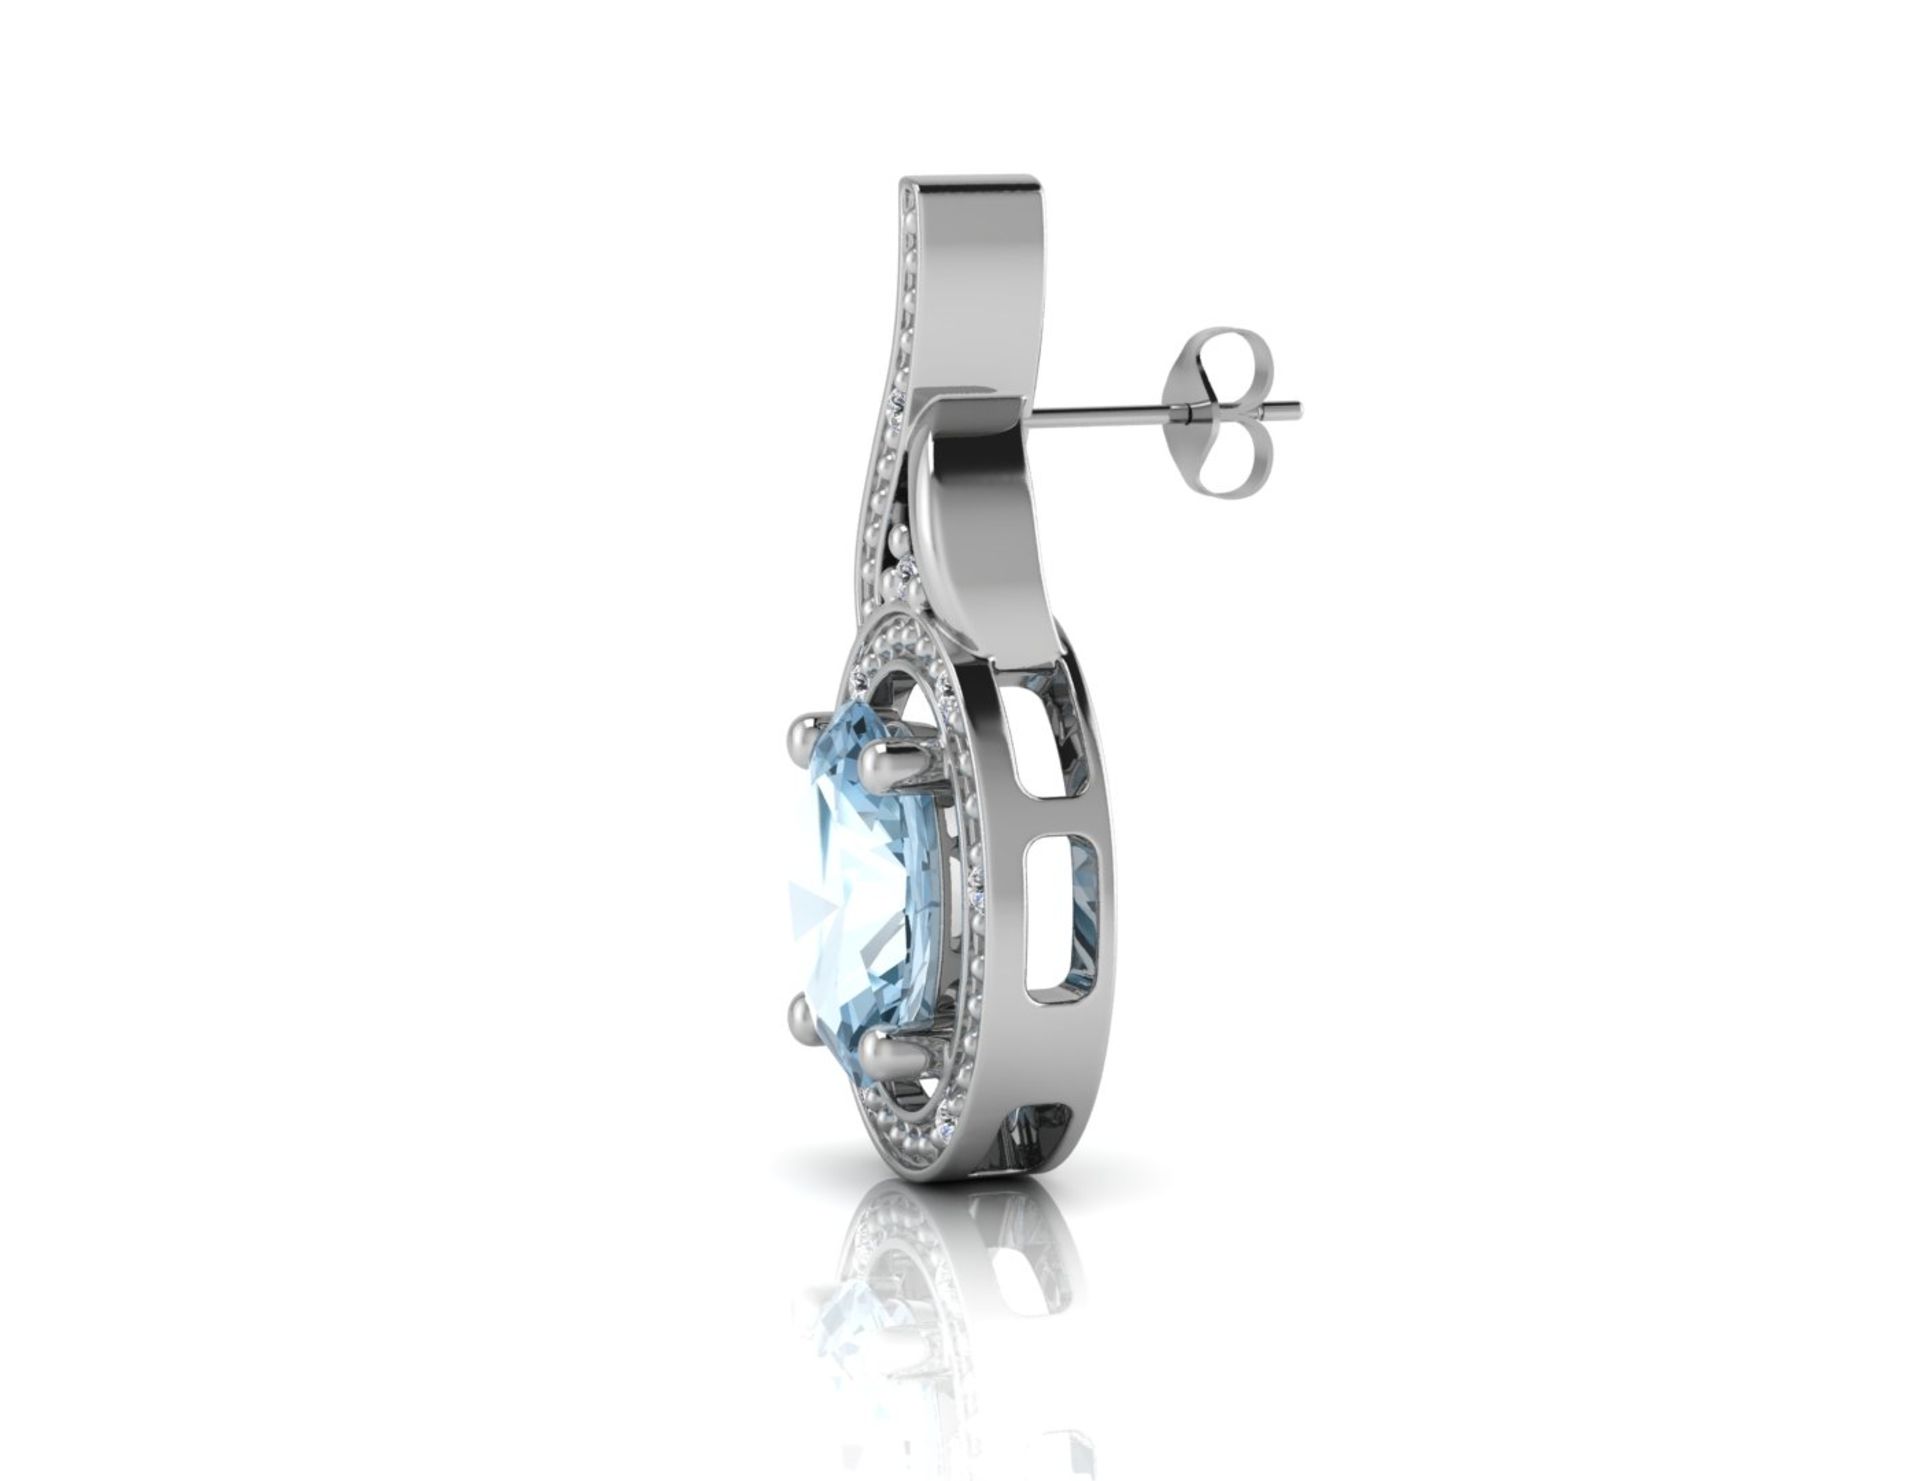 UNUSED - Certified by GIE 9ct White Gold Diamond And Blue Topaz Earring 0.05 Carats, Colour-D, - Image 2 of 4